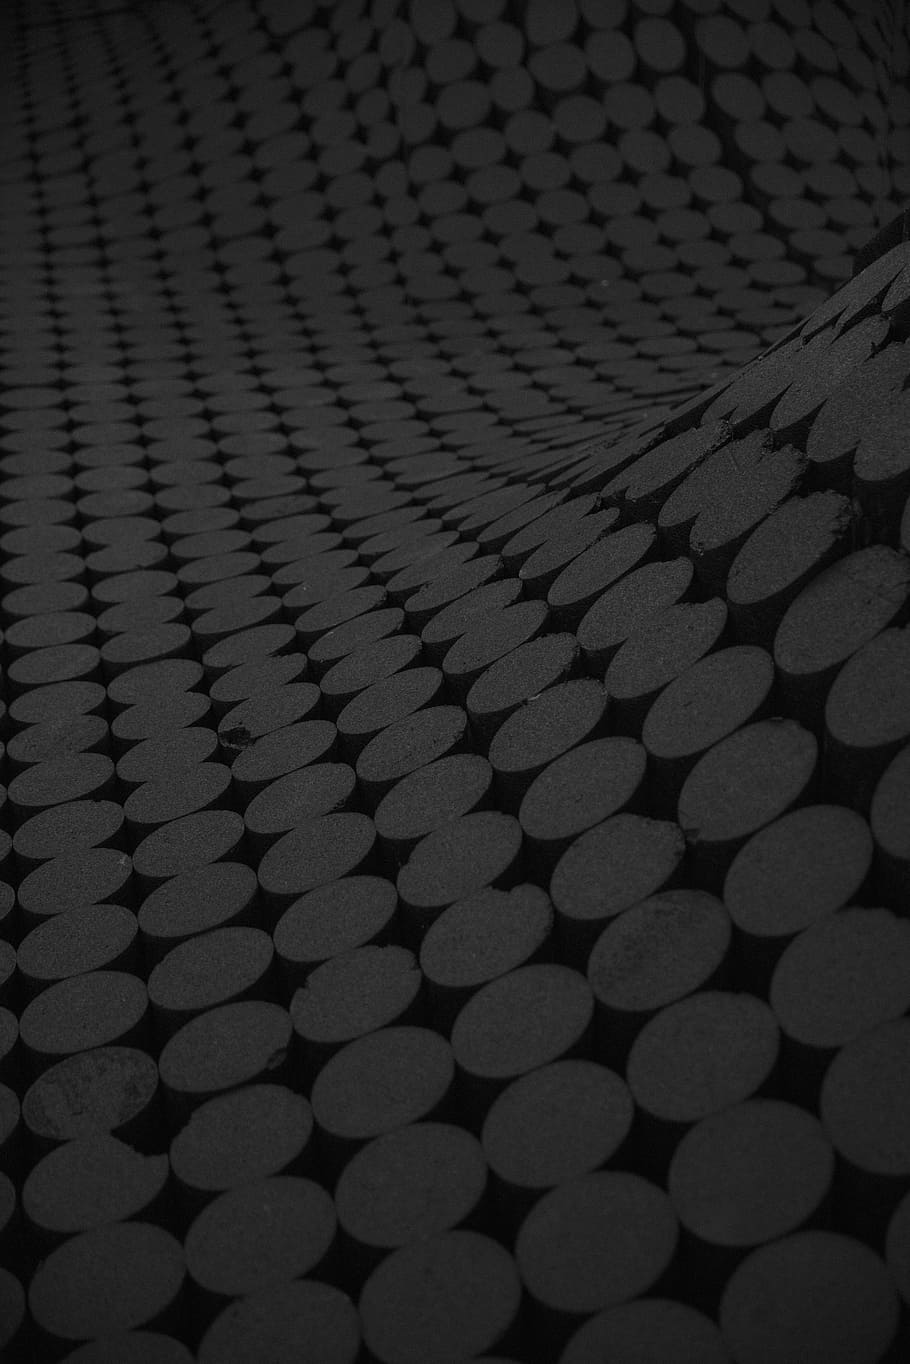 gray and black textile, abstract, art, black and white, dark